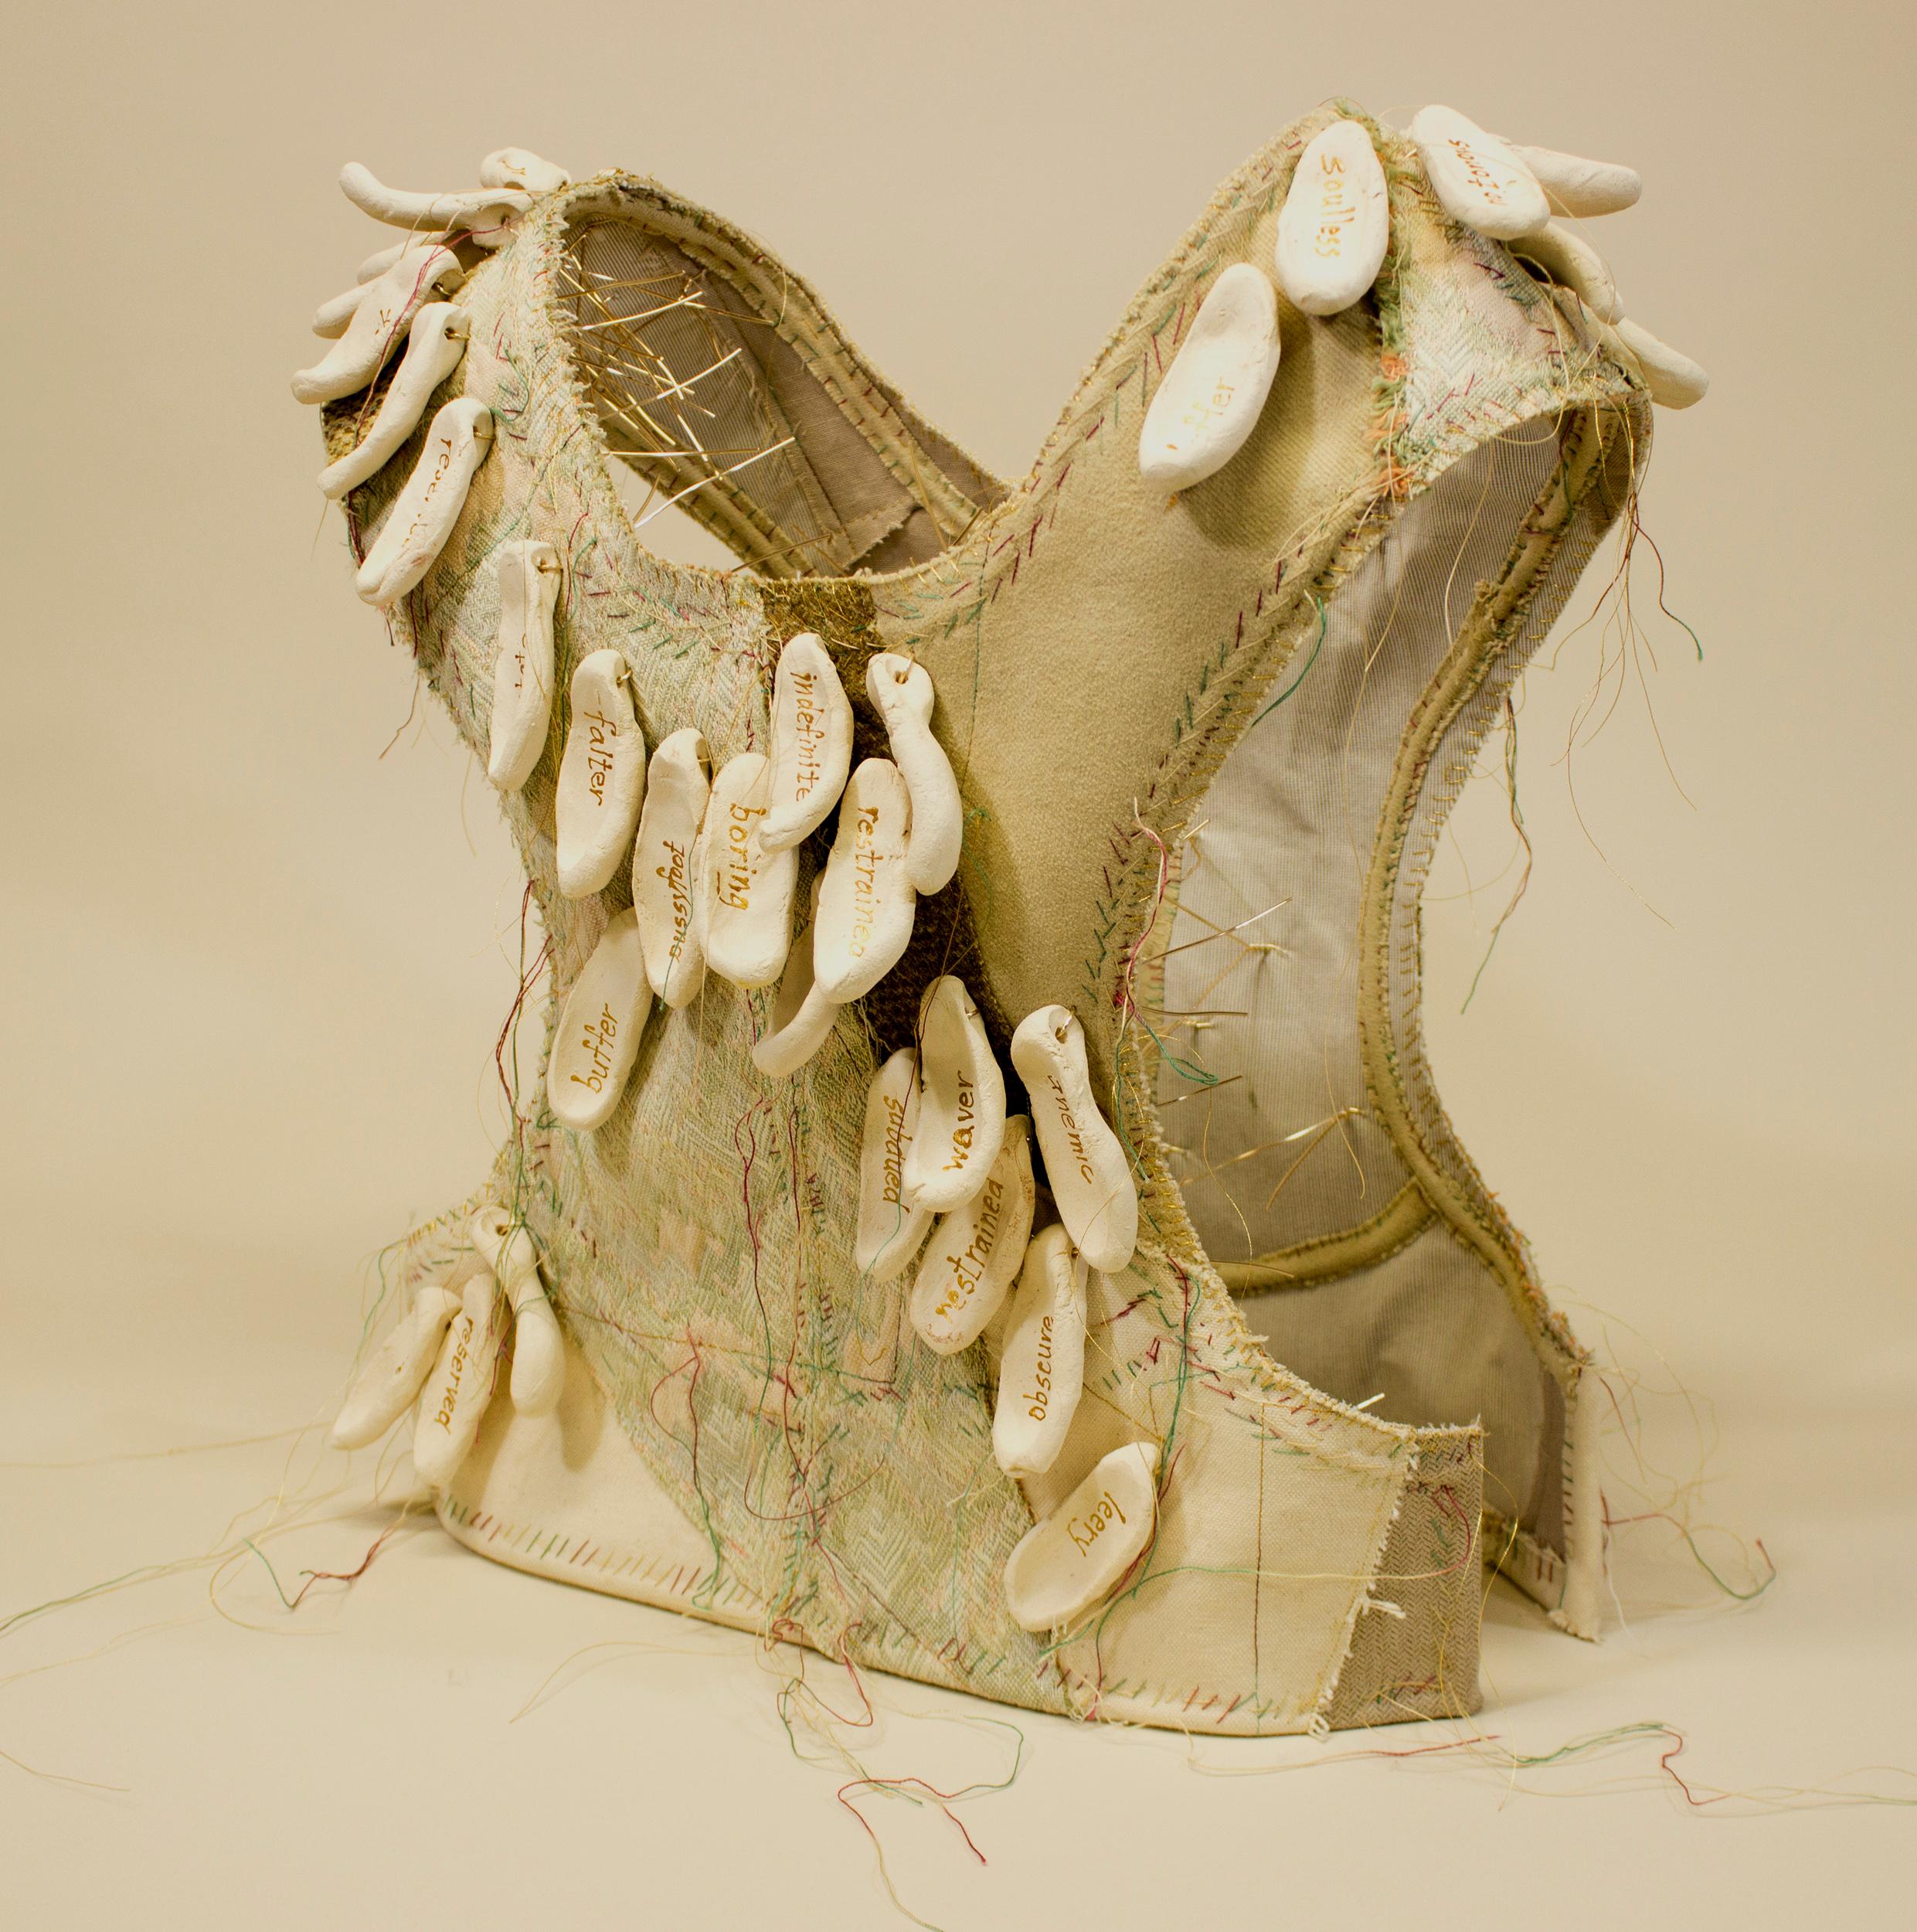 Virginia Mahoney’s “Noncommittal” is a mixed-media sculpture in vest form that is neutral in overall color, with several textures and variations. It has attached ceramic tags in off-white, on which words, referring to being unable to make decisions